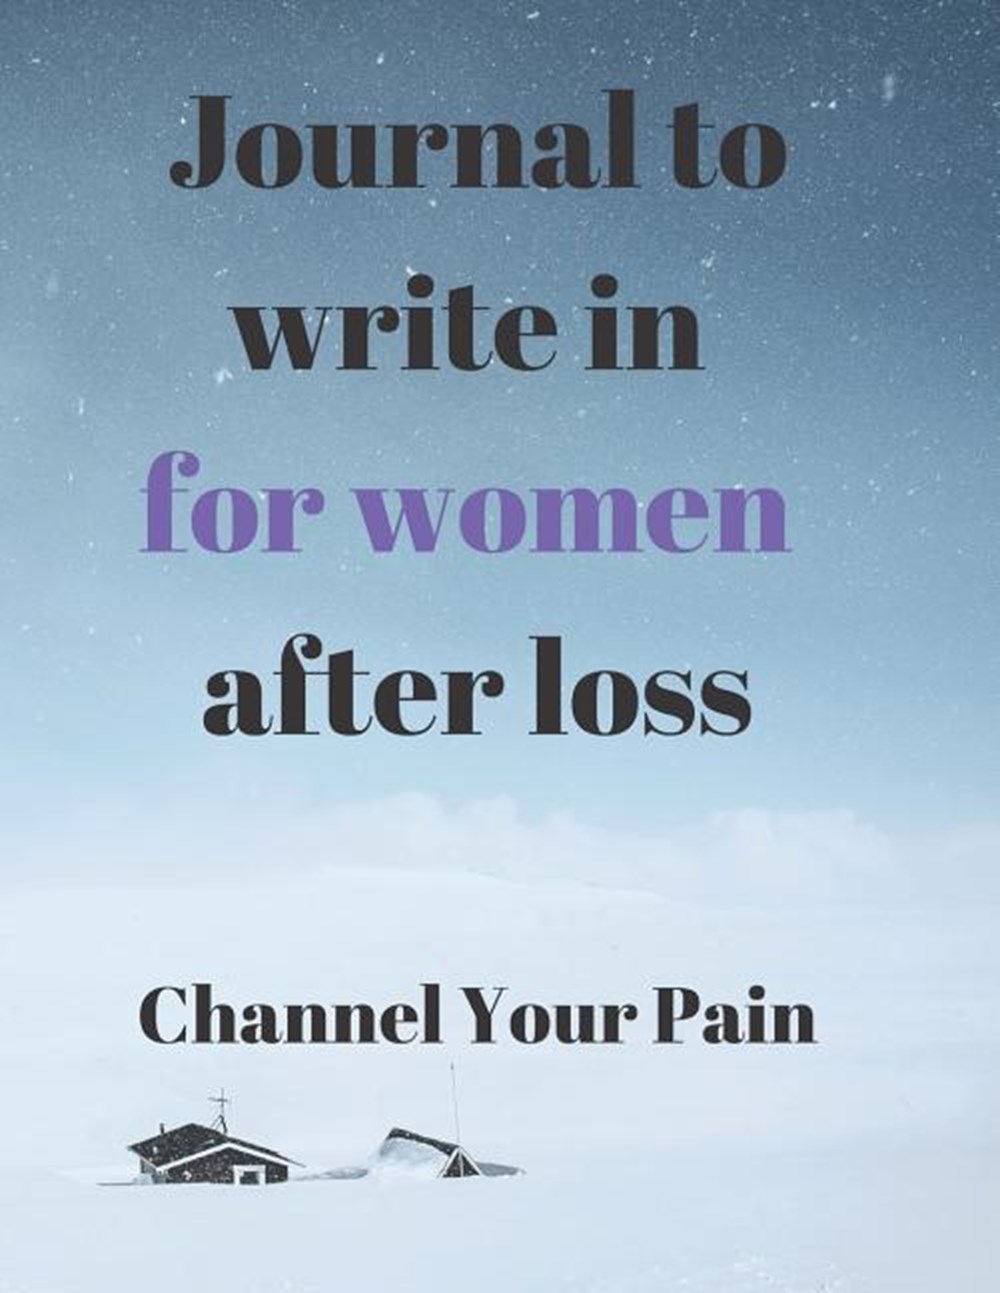 Journals to Write in for Women After Loss Channel the pain of your loss in Writing!